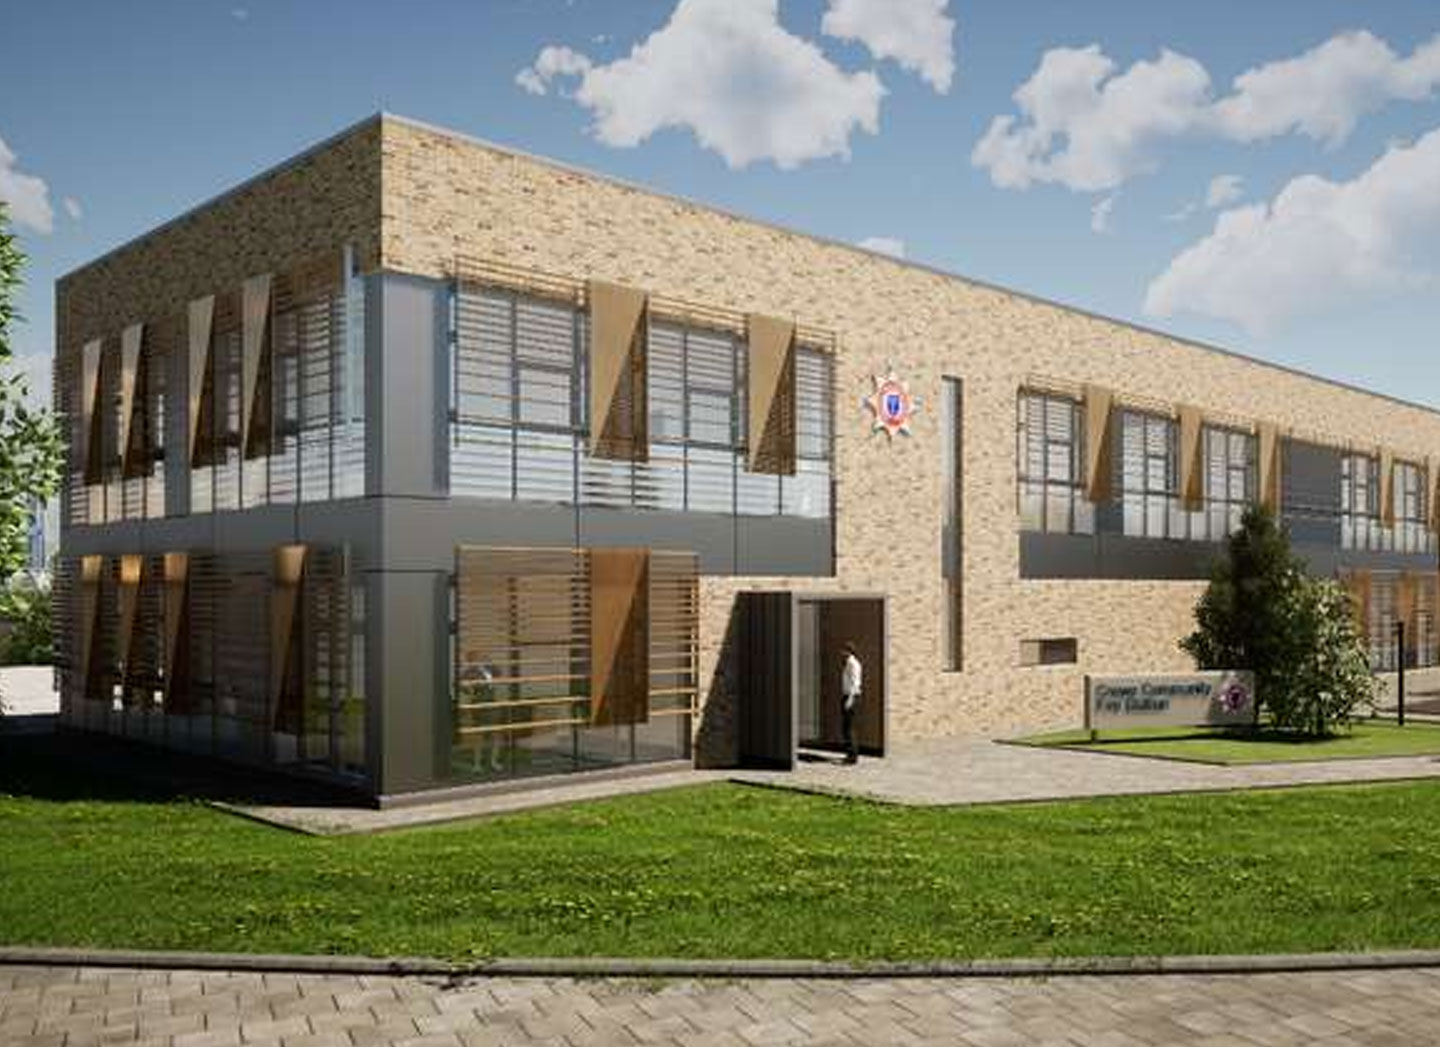 external visual of the new Crewe Fire Station exterior